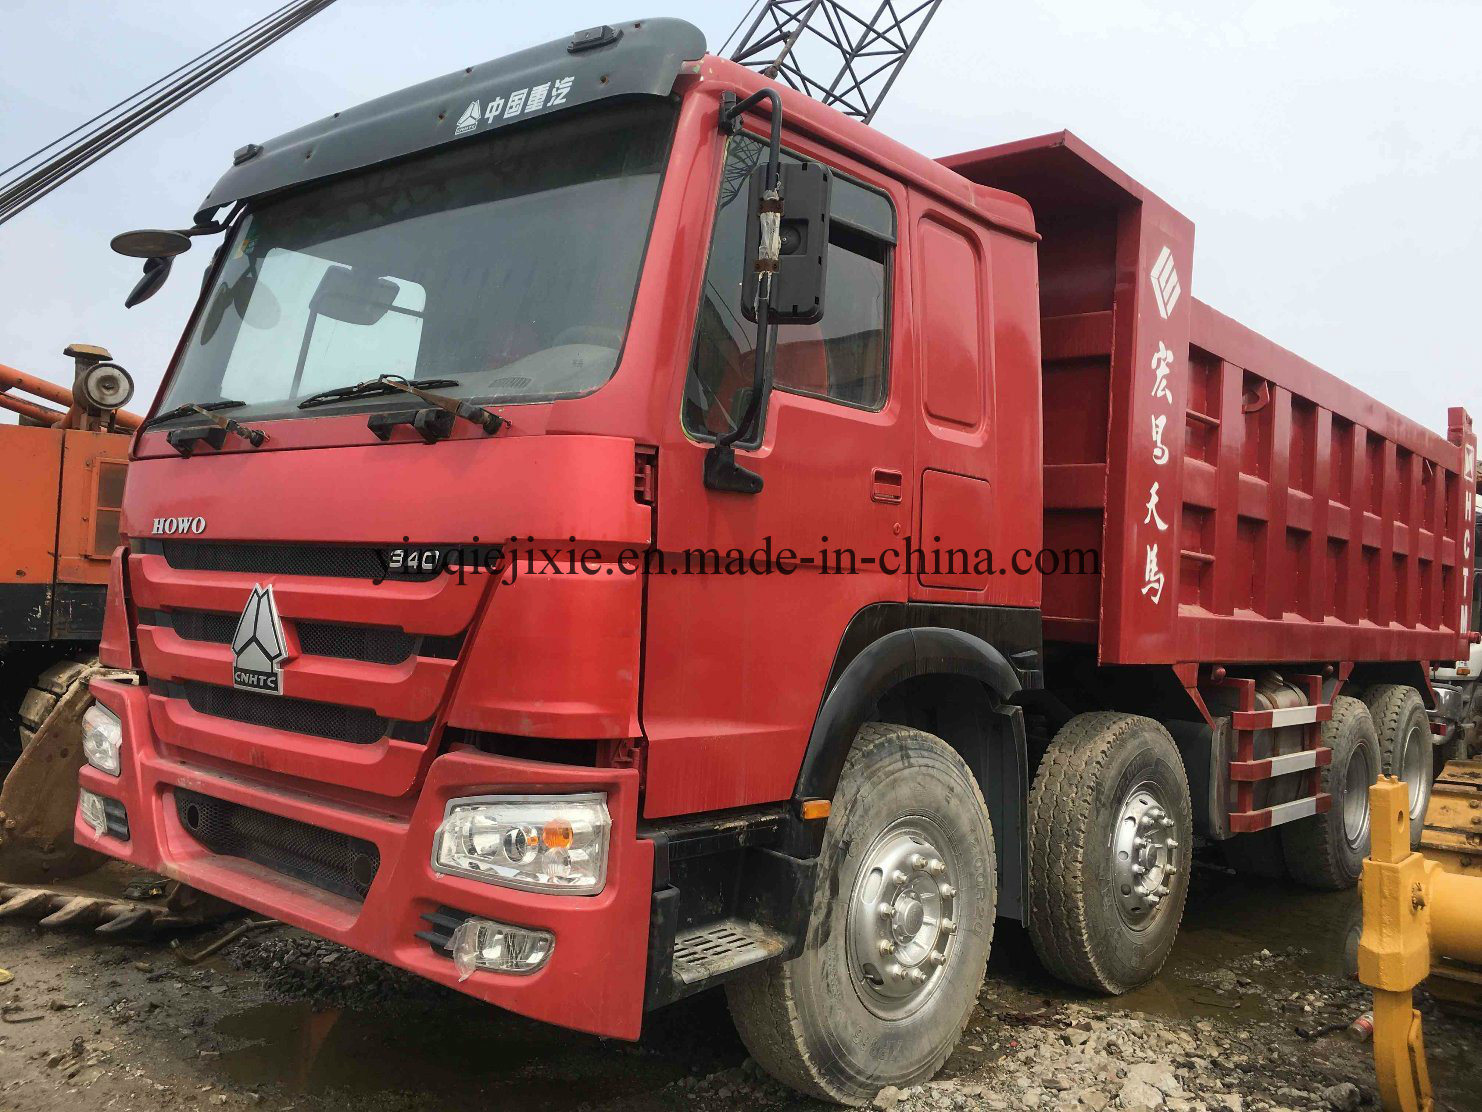 Used HOWO Dump Truck in High Quality with Low Price, Secondhand HOWO Dump Truck 340